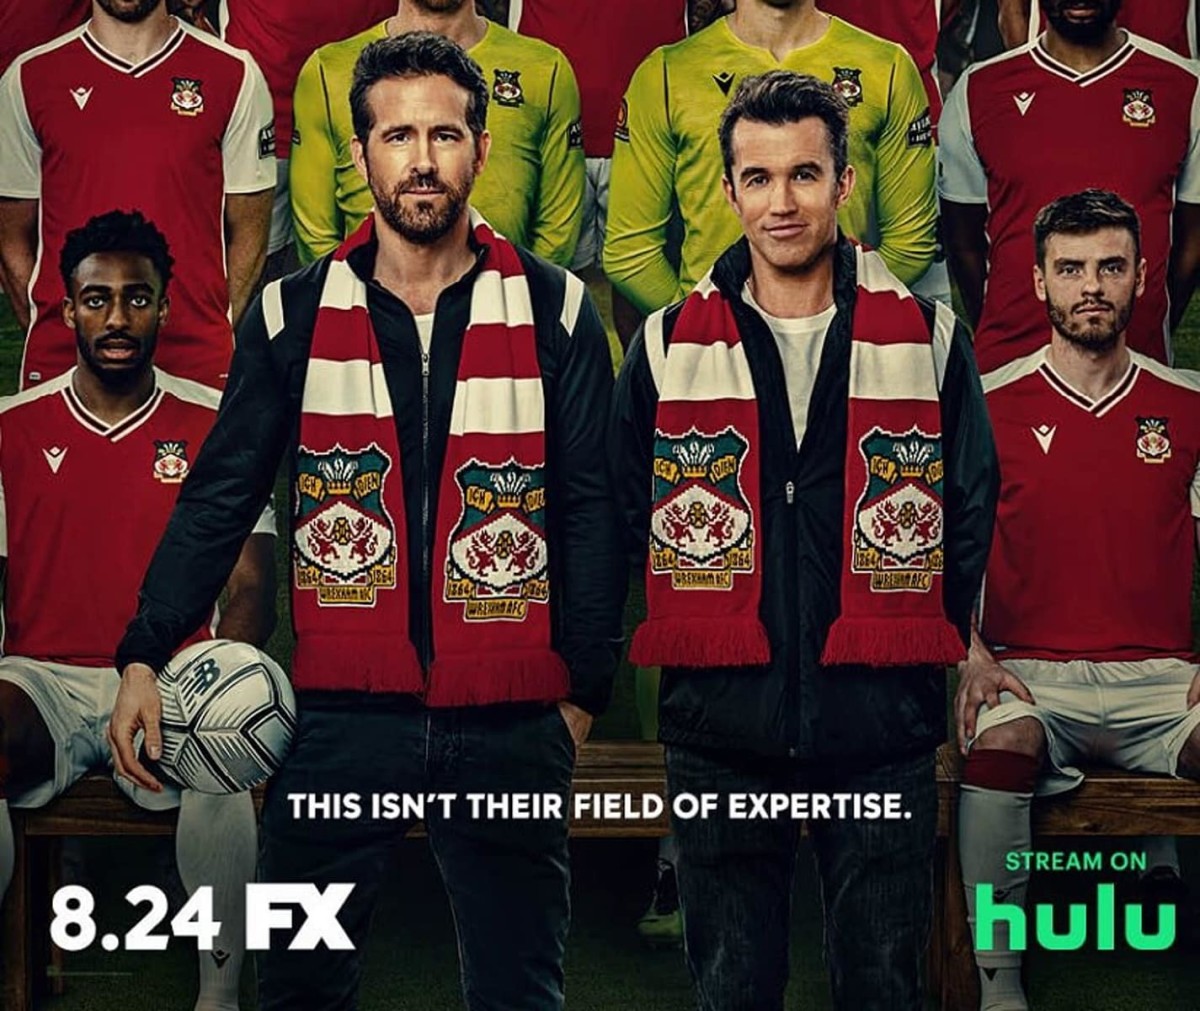 Welcome to Wrexham cover photo showing Ryan Reynolds and Rob McElhenney alondside the team